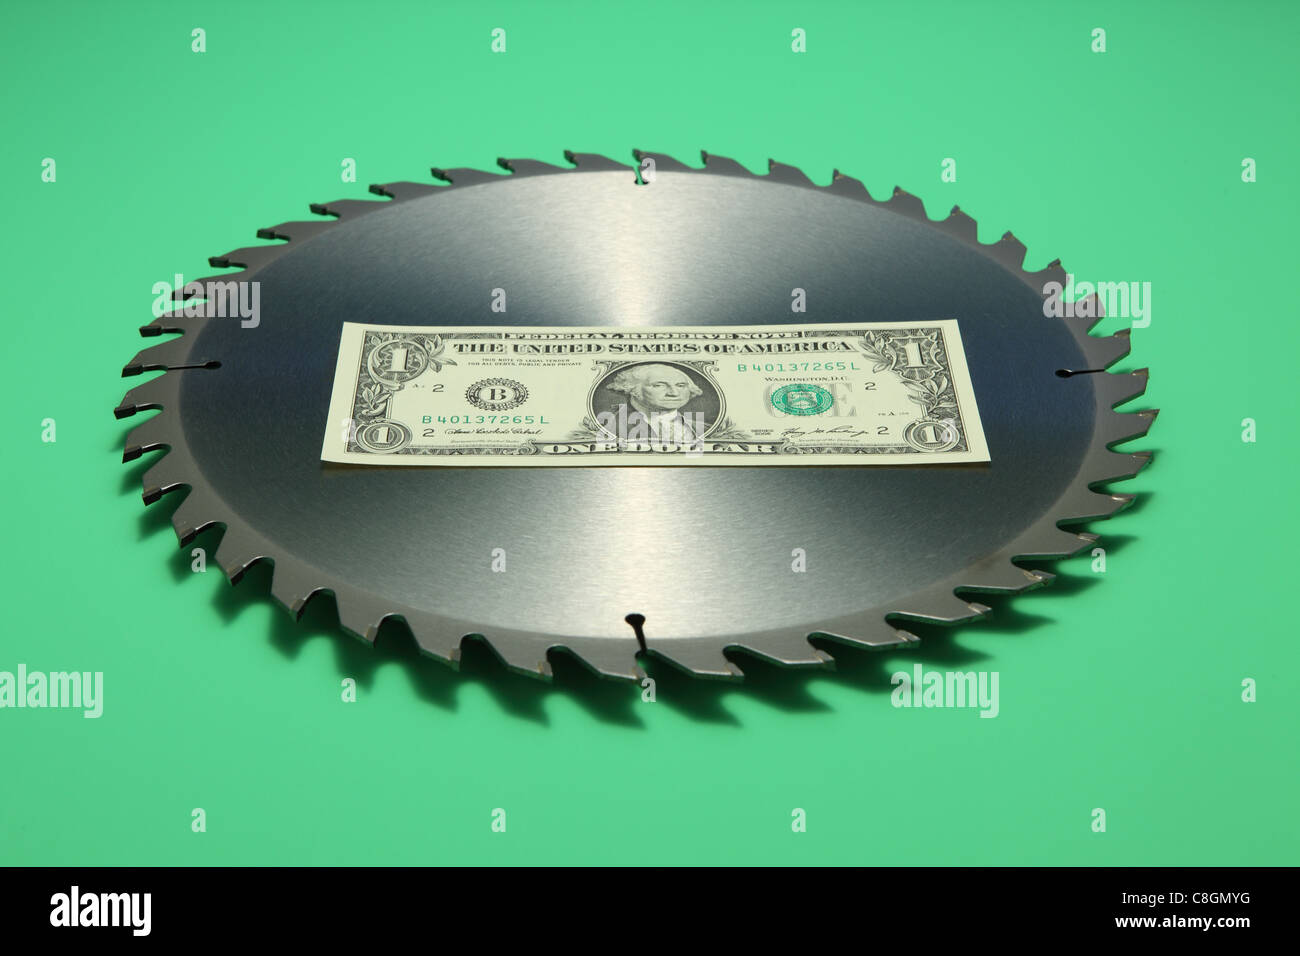 One US dollar banknote in the middle of a metal circular saw blade. Bright green background, banknote front facing Stock Photo